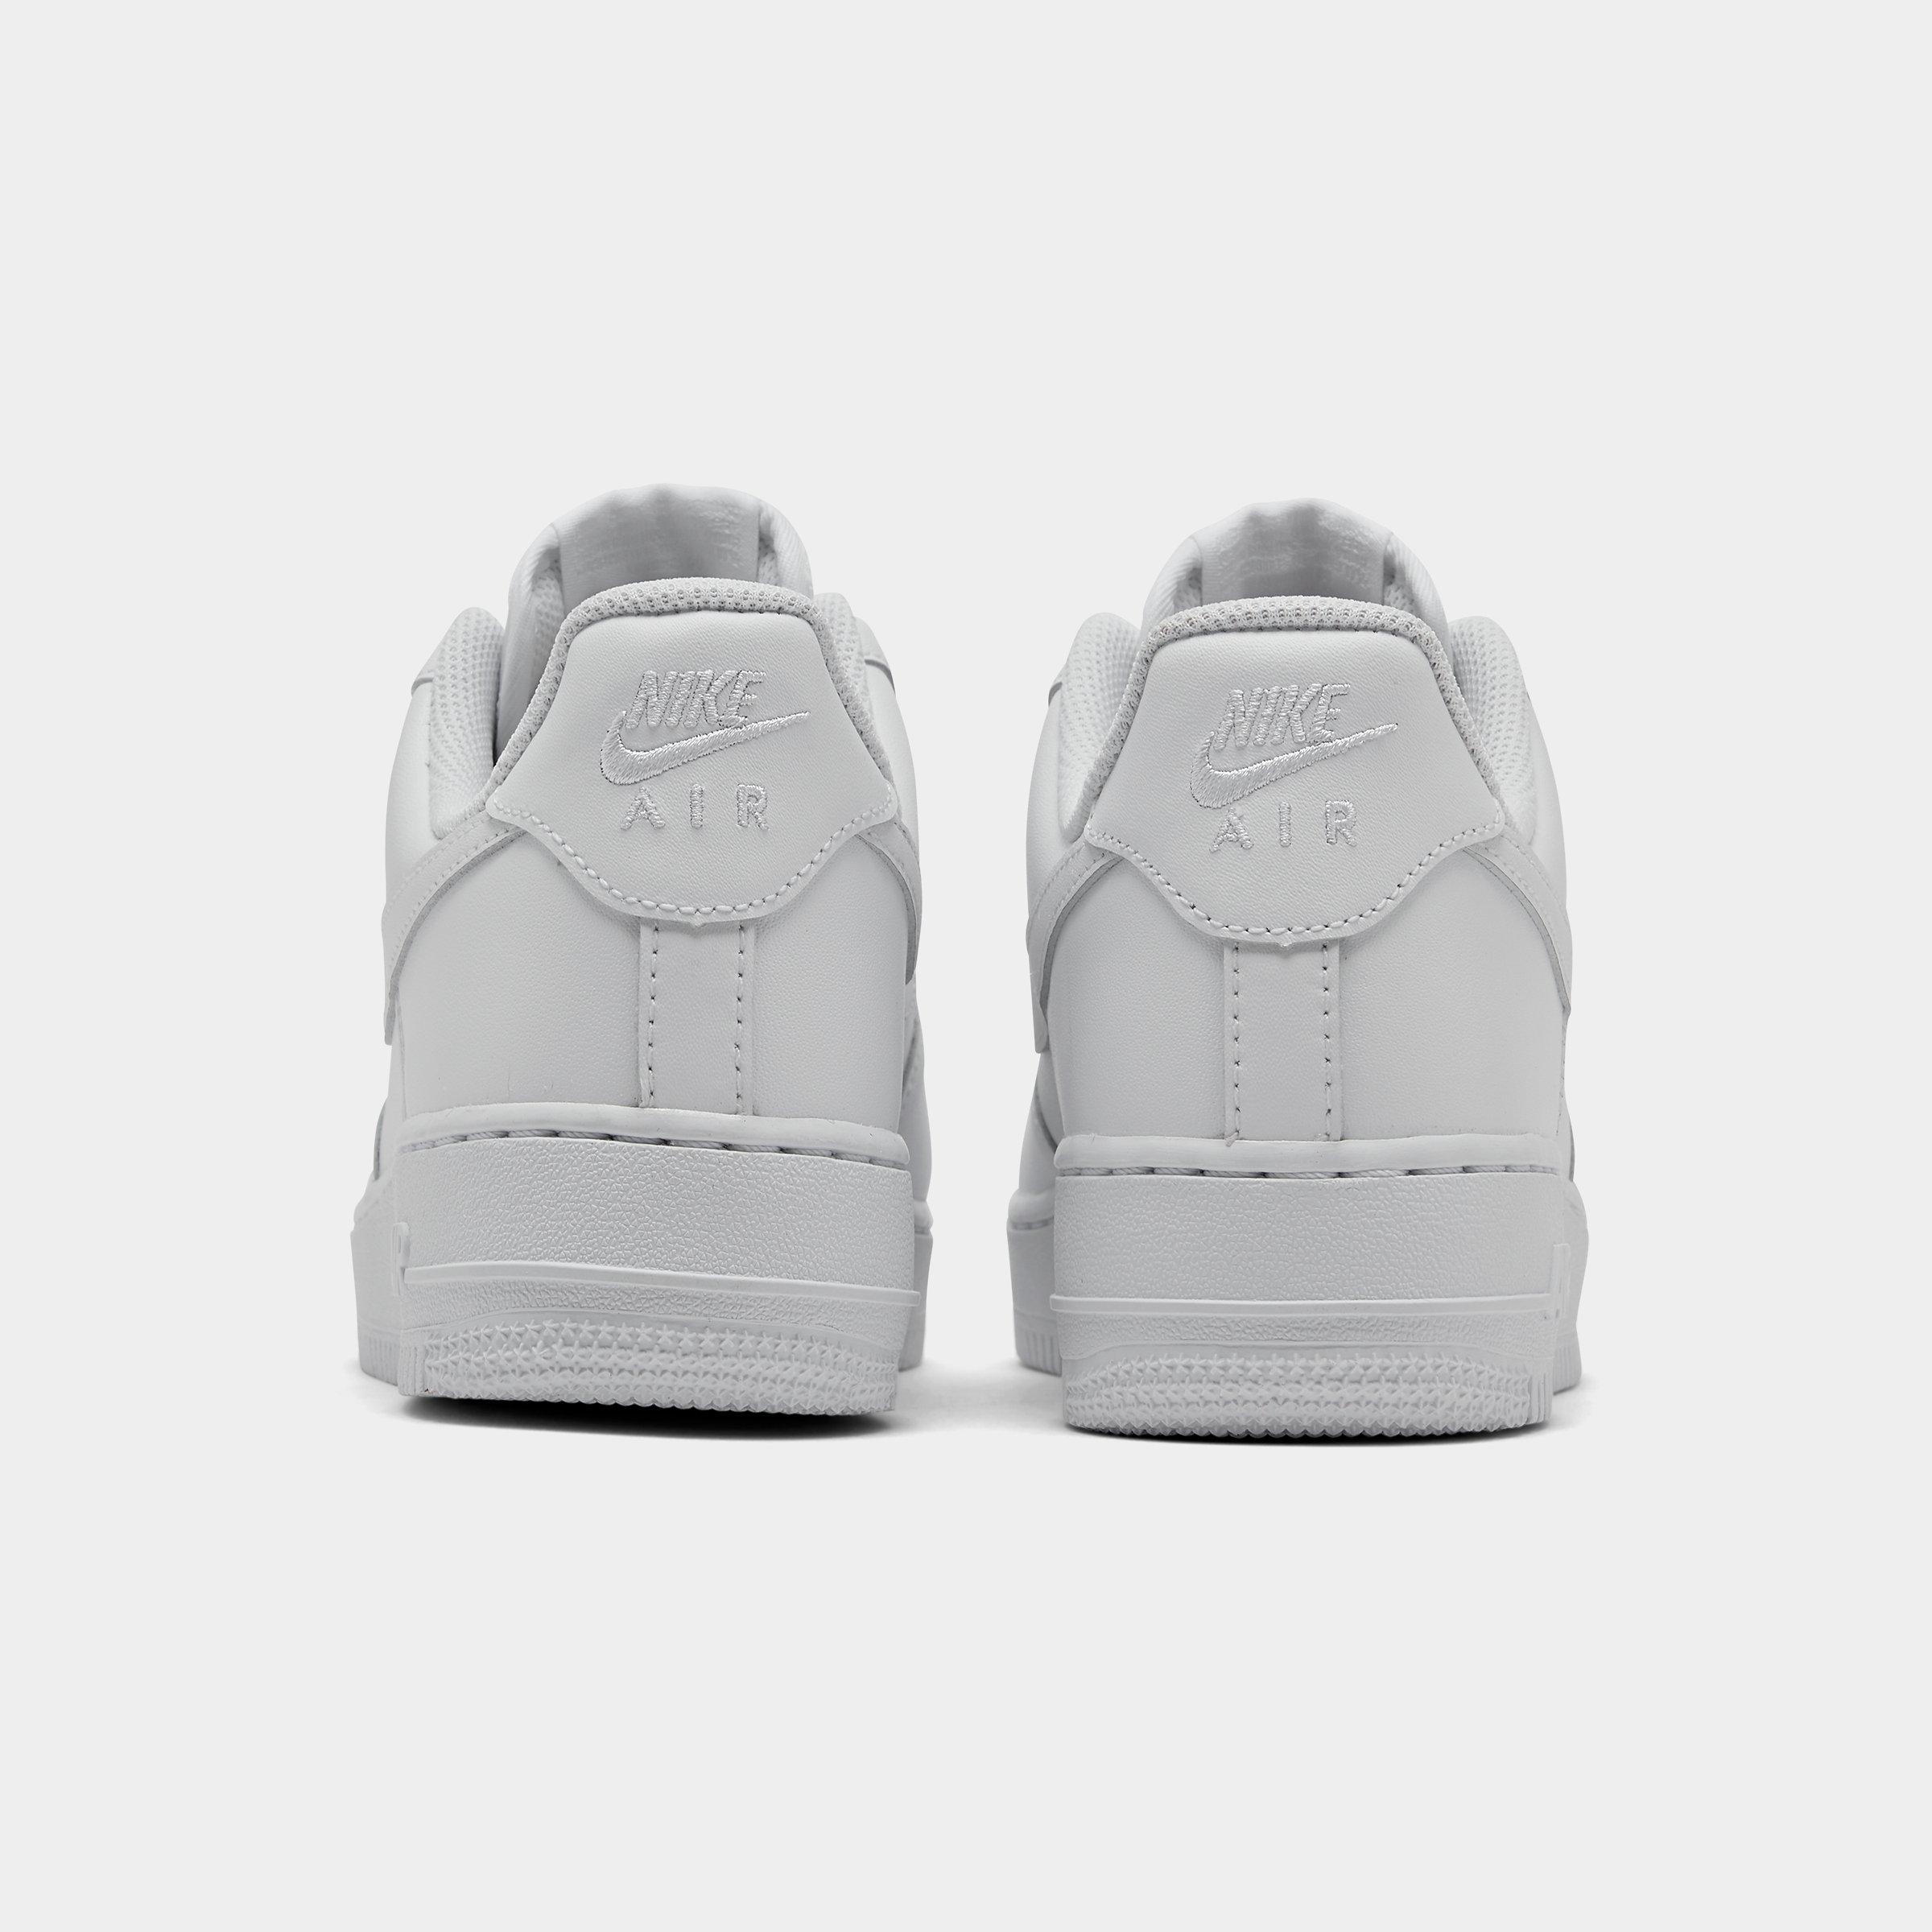 finish line nike air force 1 womens